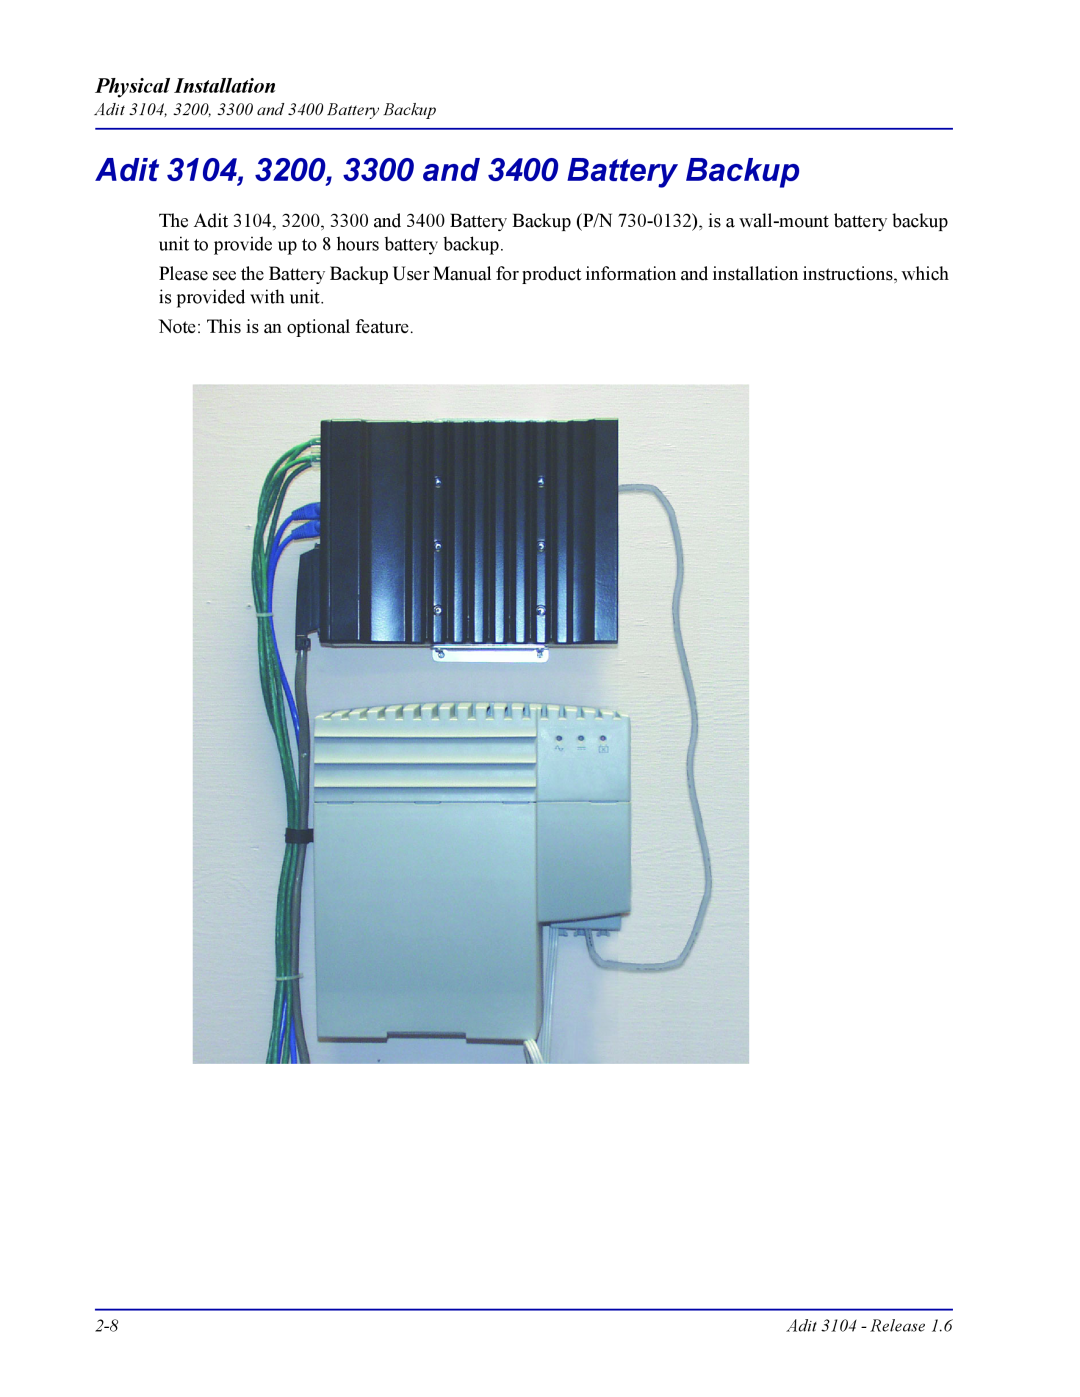 Carrier Access user manual Adit 3104, 3200, 3300 and 3400 Battery Backup, Physical Installation 